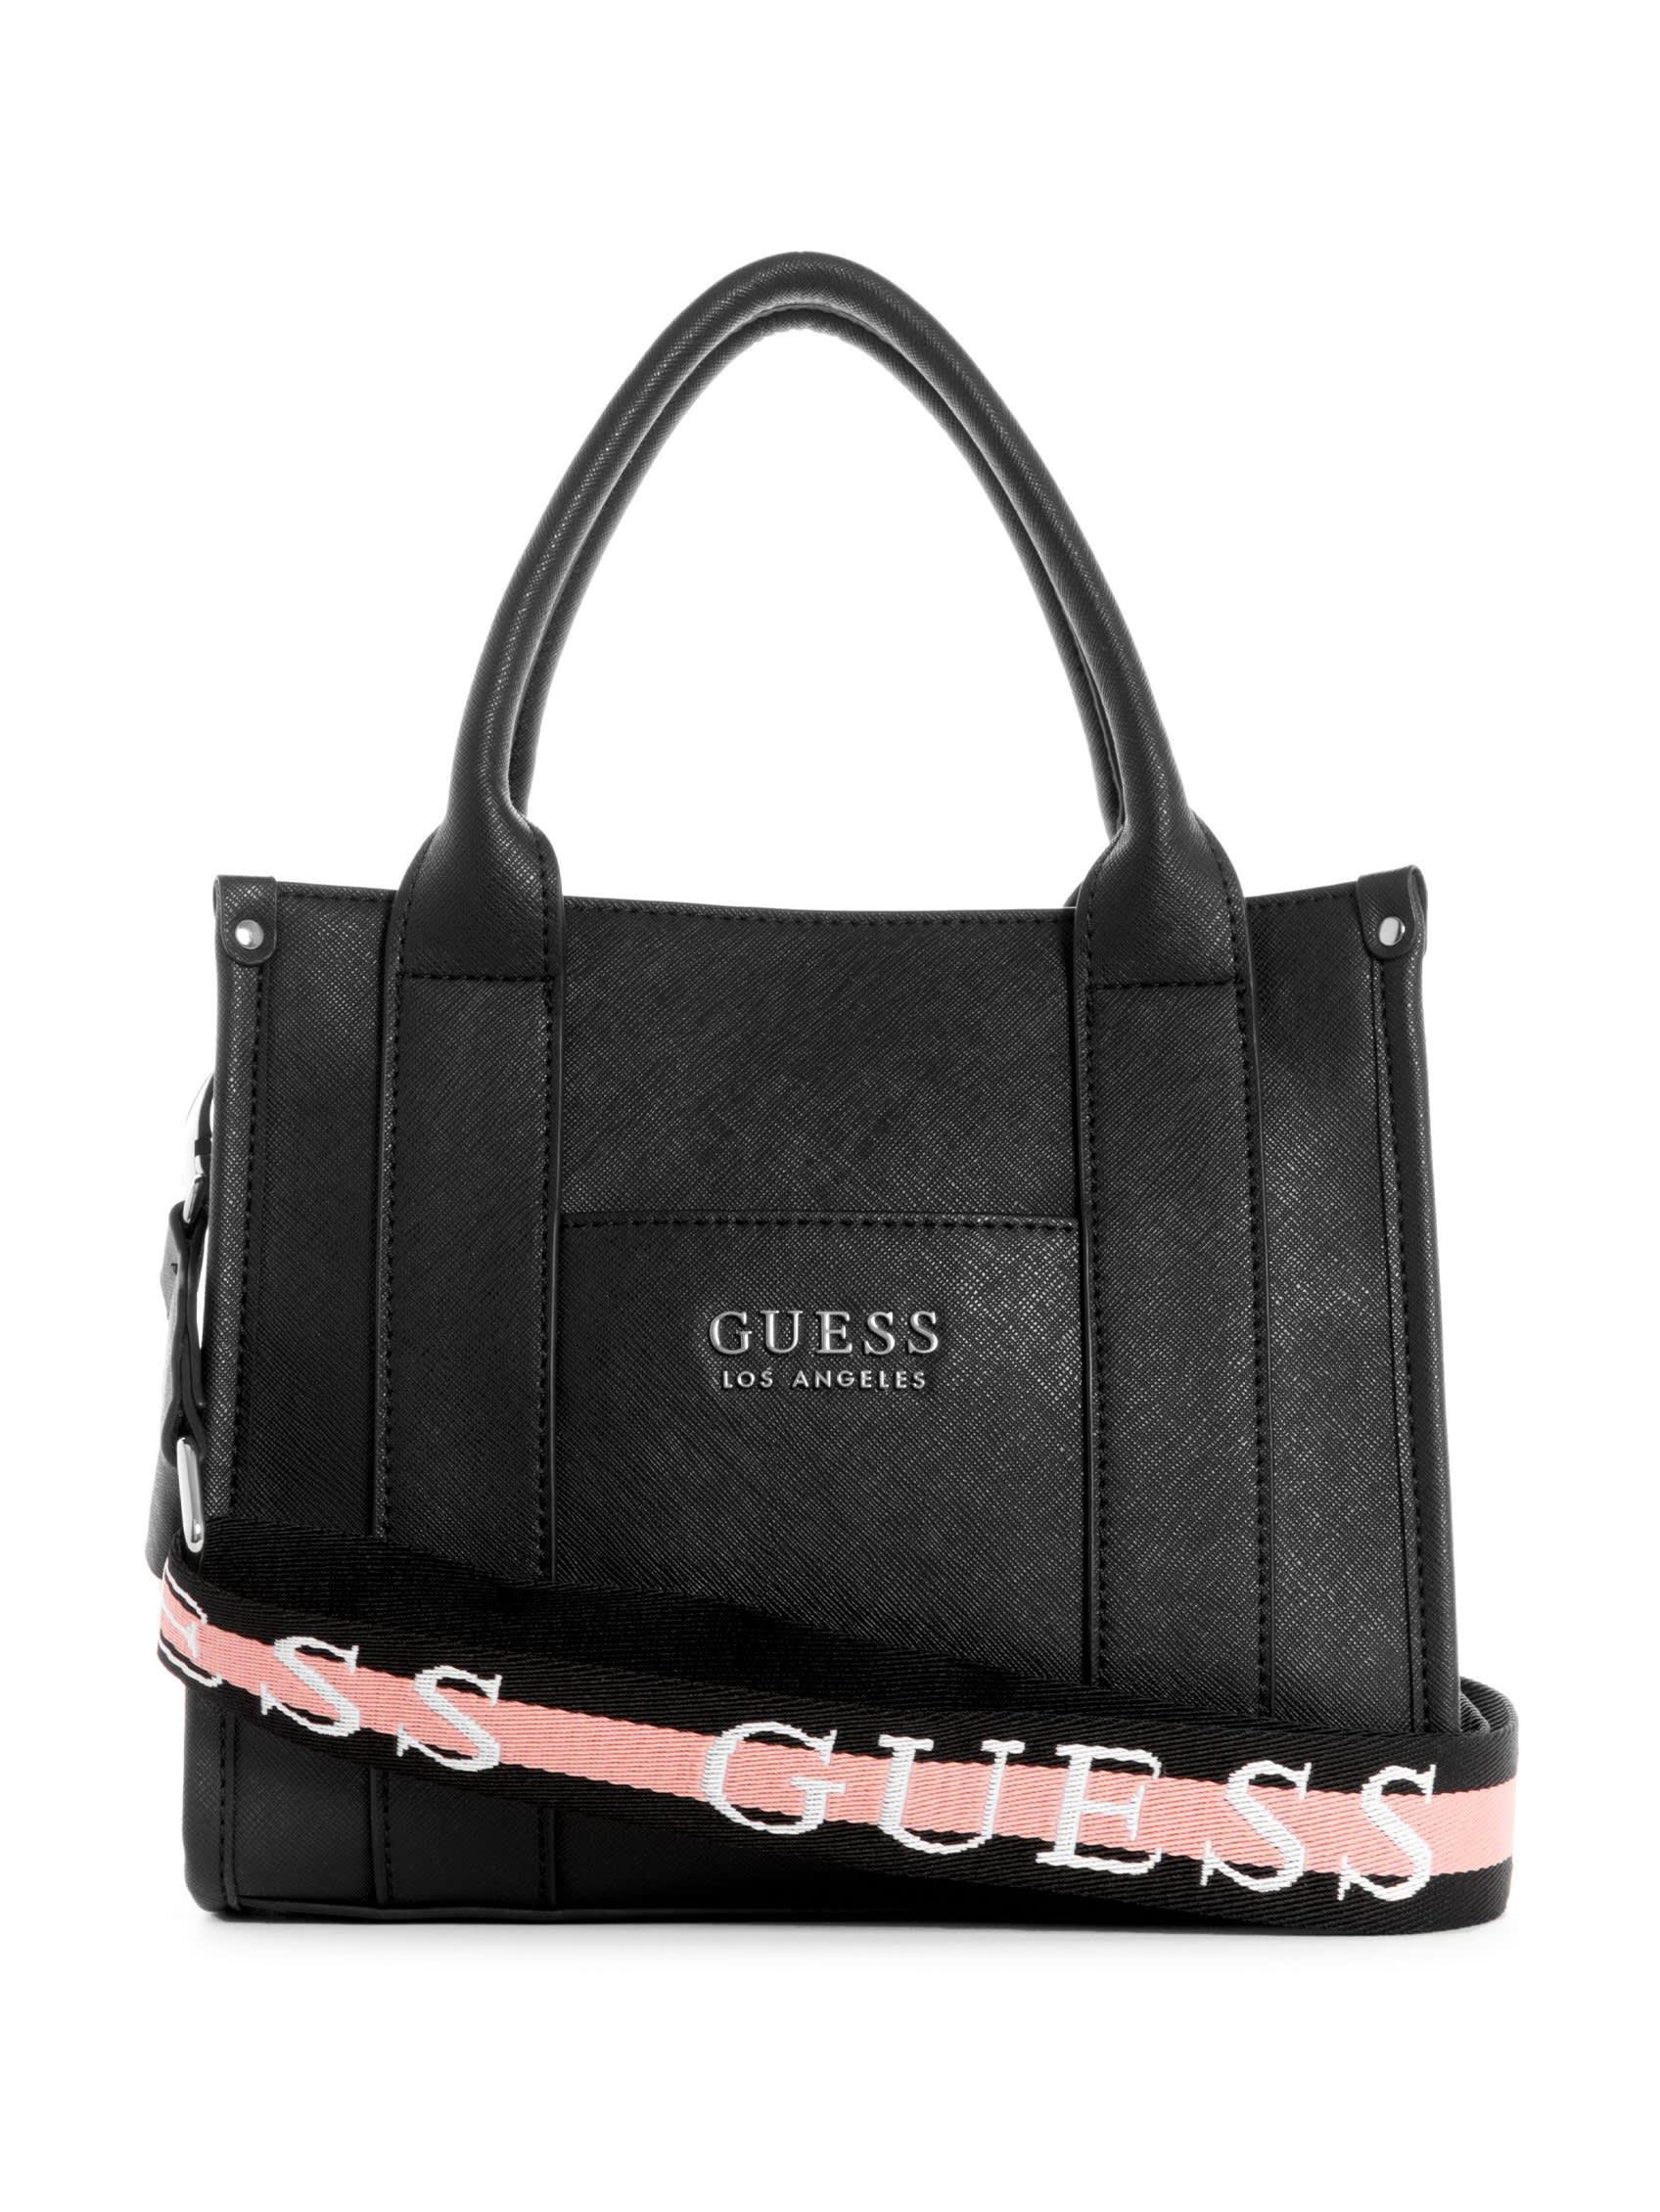 Guess Factory Esme Small Satchel in Black | Lyst